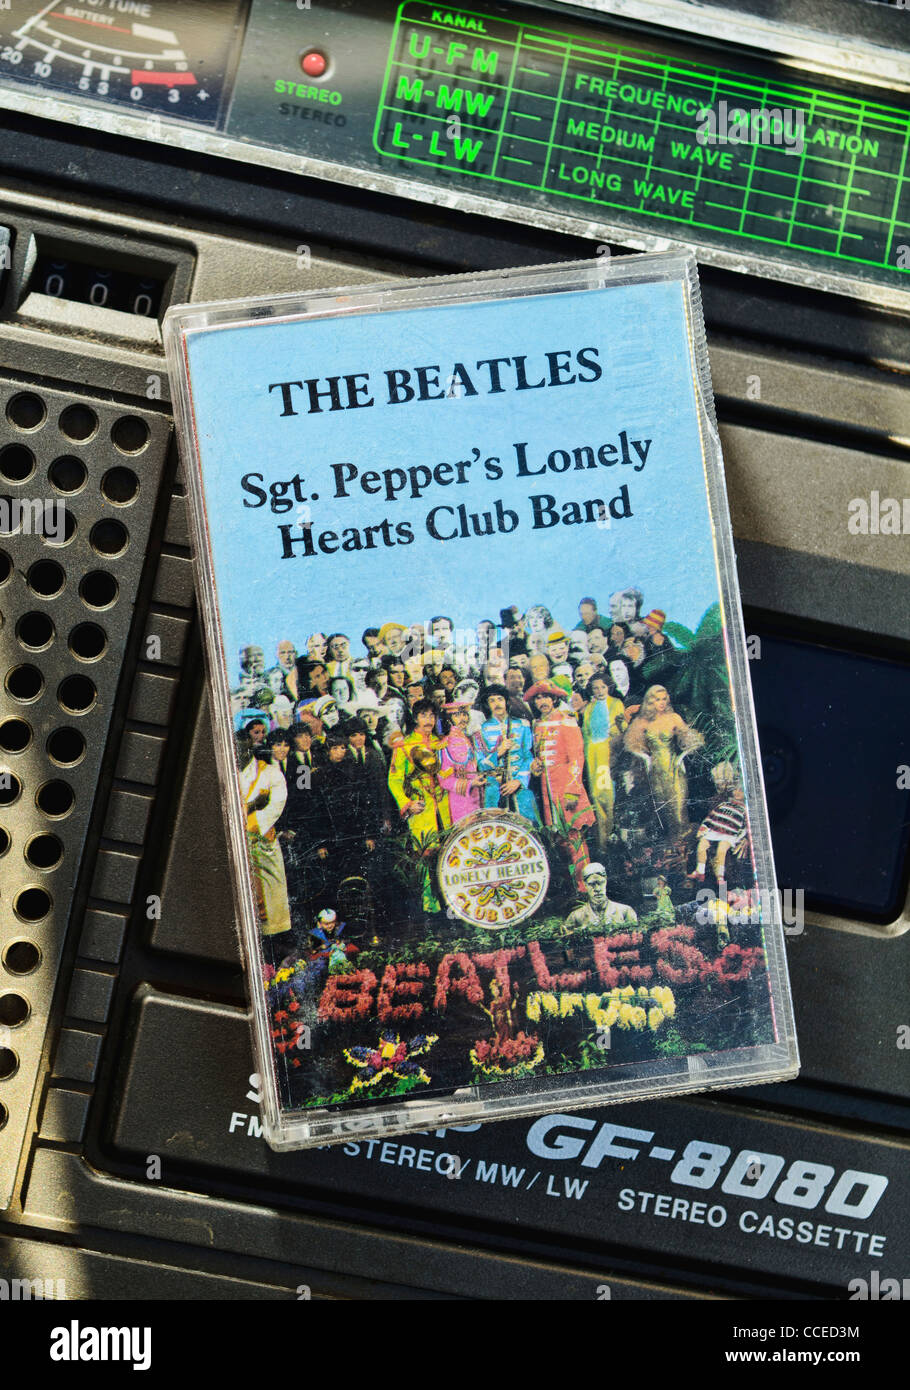 The Beatles, Sgt. Peppers Lonely Hearts Club Band Album on Cassette Tape Stock Photo